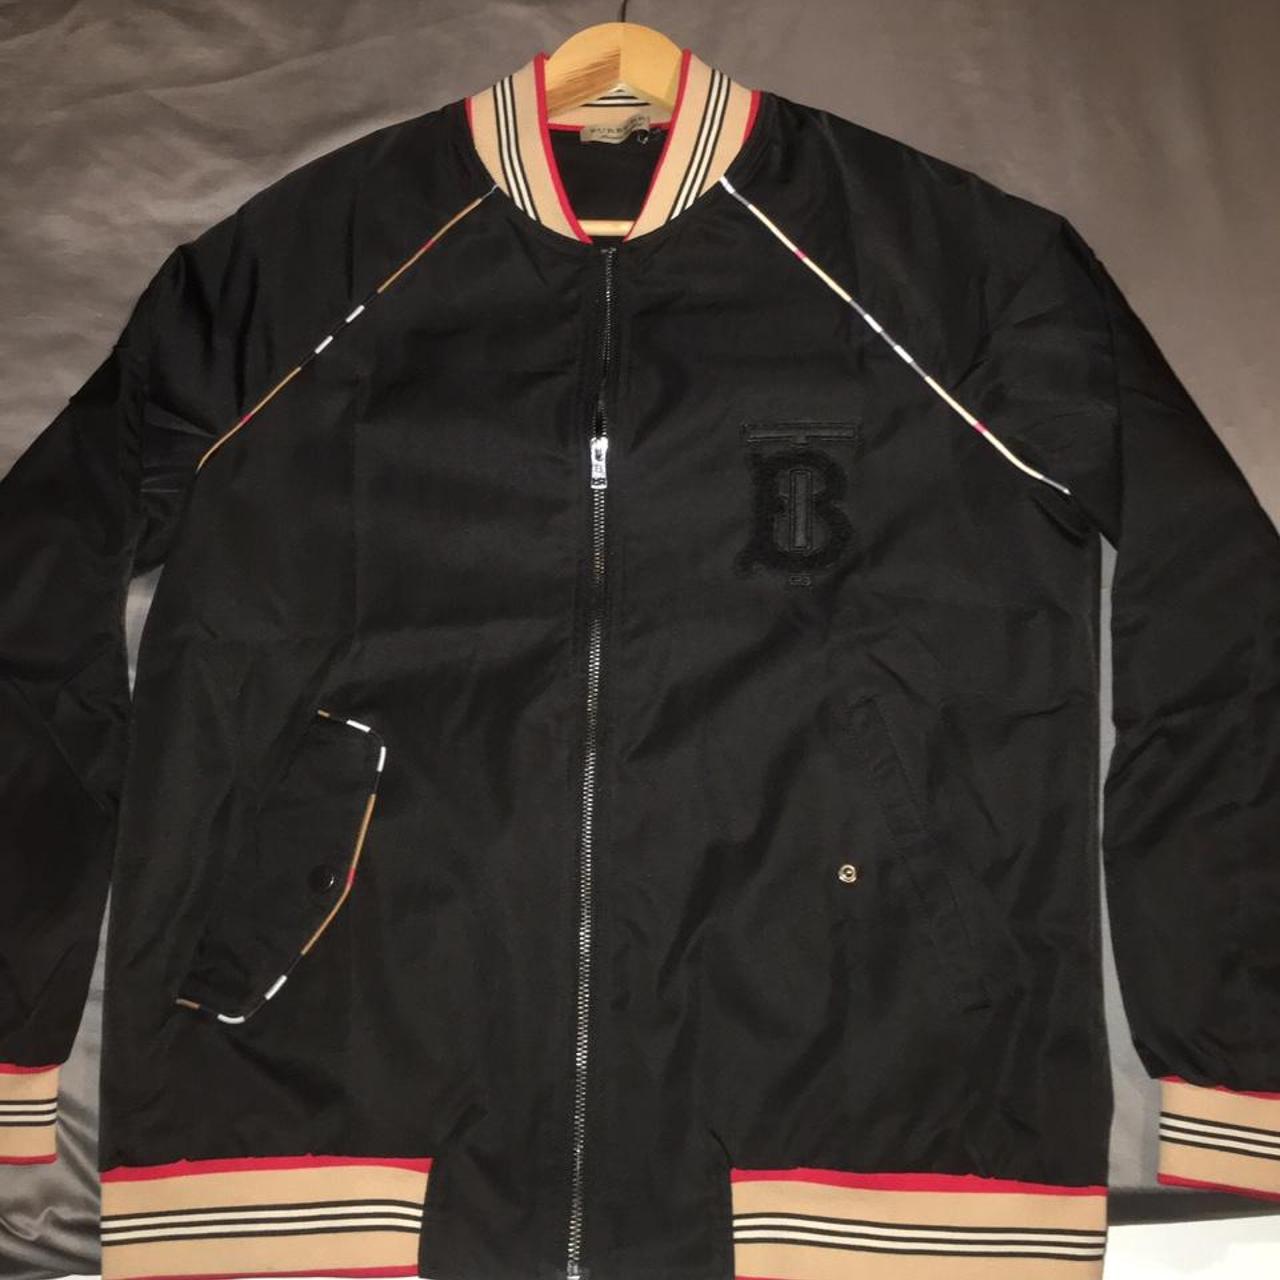 Thomas Burberry vintage bomber jacket, in extremely... Depop